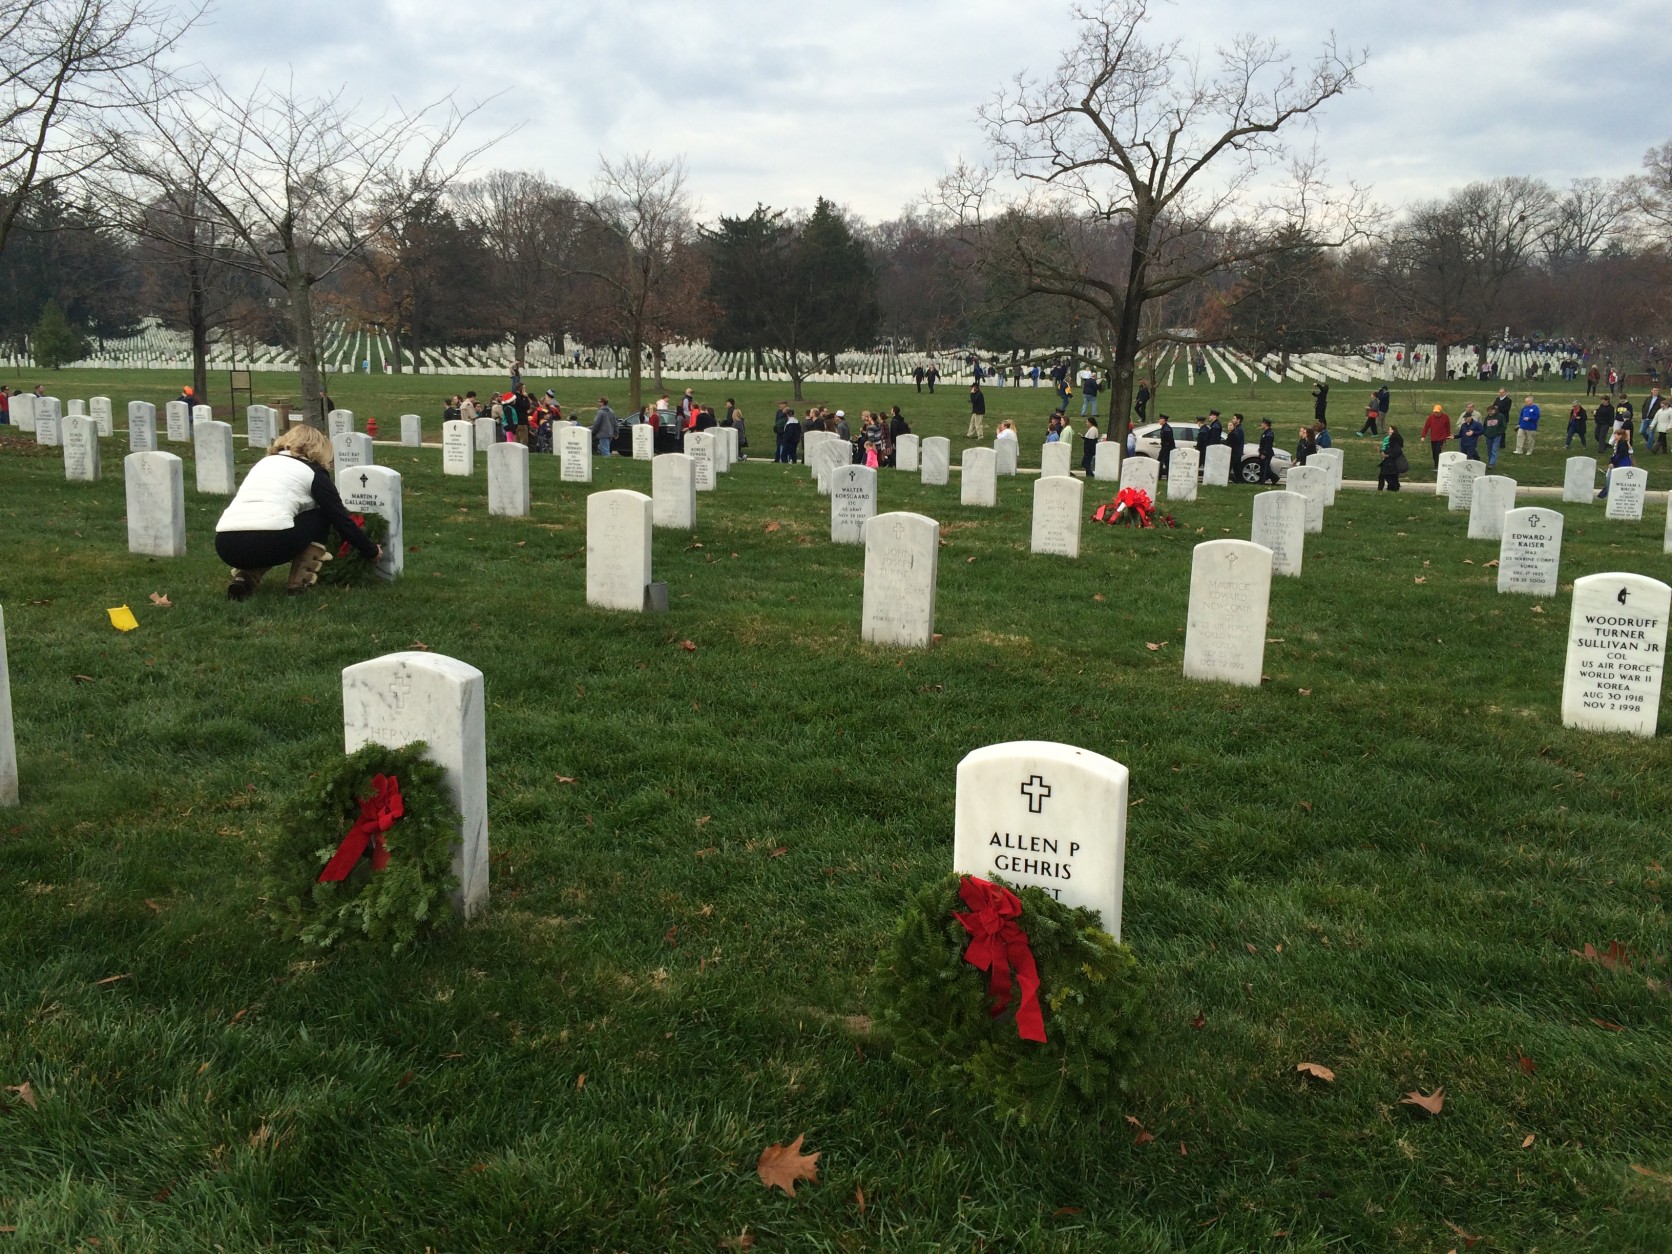 Thousands of families, friends and strangers placed wreaths on the graves of veterans and fallen soldiers at Arlington National Cemetery on Saturday, Dec. 12, 2105. (WTOP/Nick Iannelli)